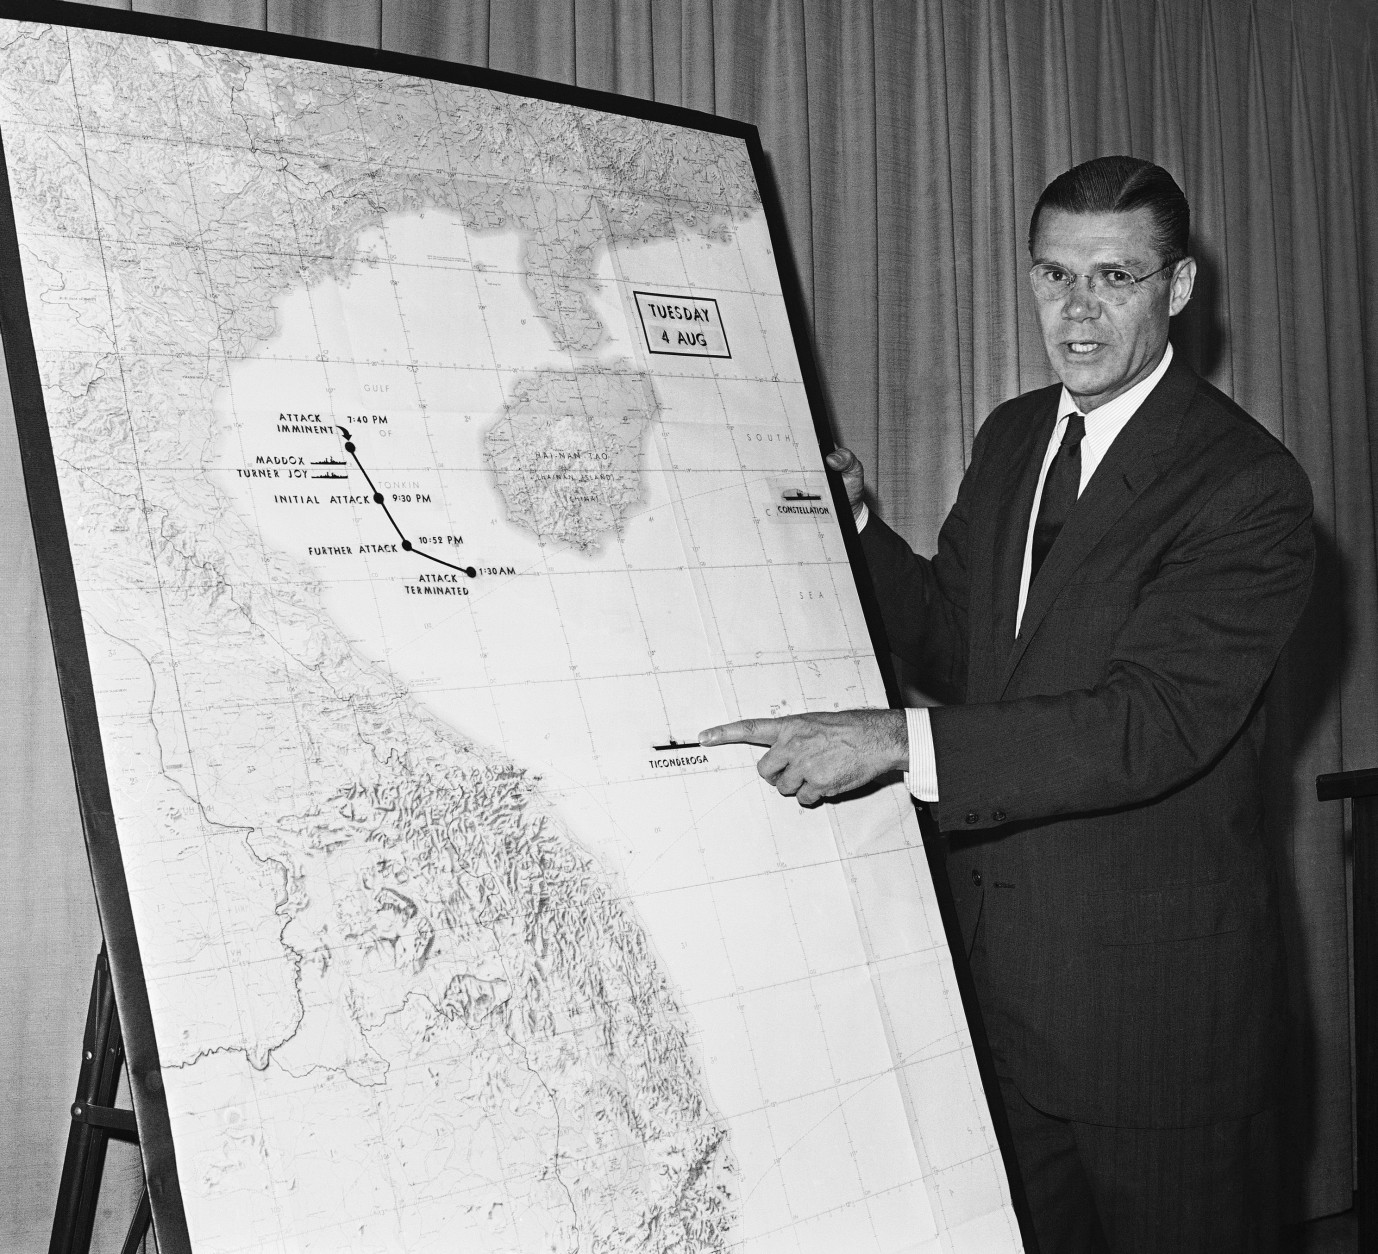 On this date in 1964, Congress passed the Gulf of Tonkin resolution, giving President Lyndon B. Johnson broad powers in dealing with reported North Vietnamese attacks on U.S. forces. Here, Secretary of Defense Robert S. McNamara in a post-midnight press briefing, August 4, 1964 in the Pentagon points out action in Gulf of Tonkin. (AP Photo/Bob Schutz)